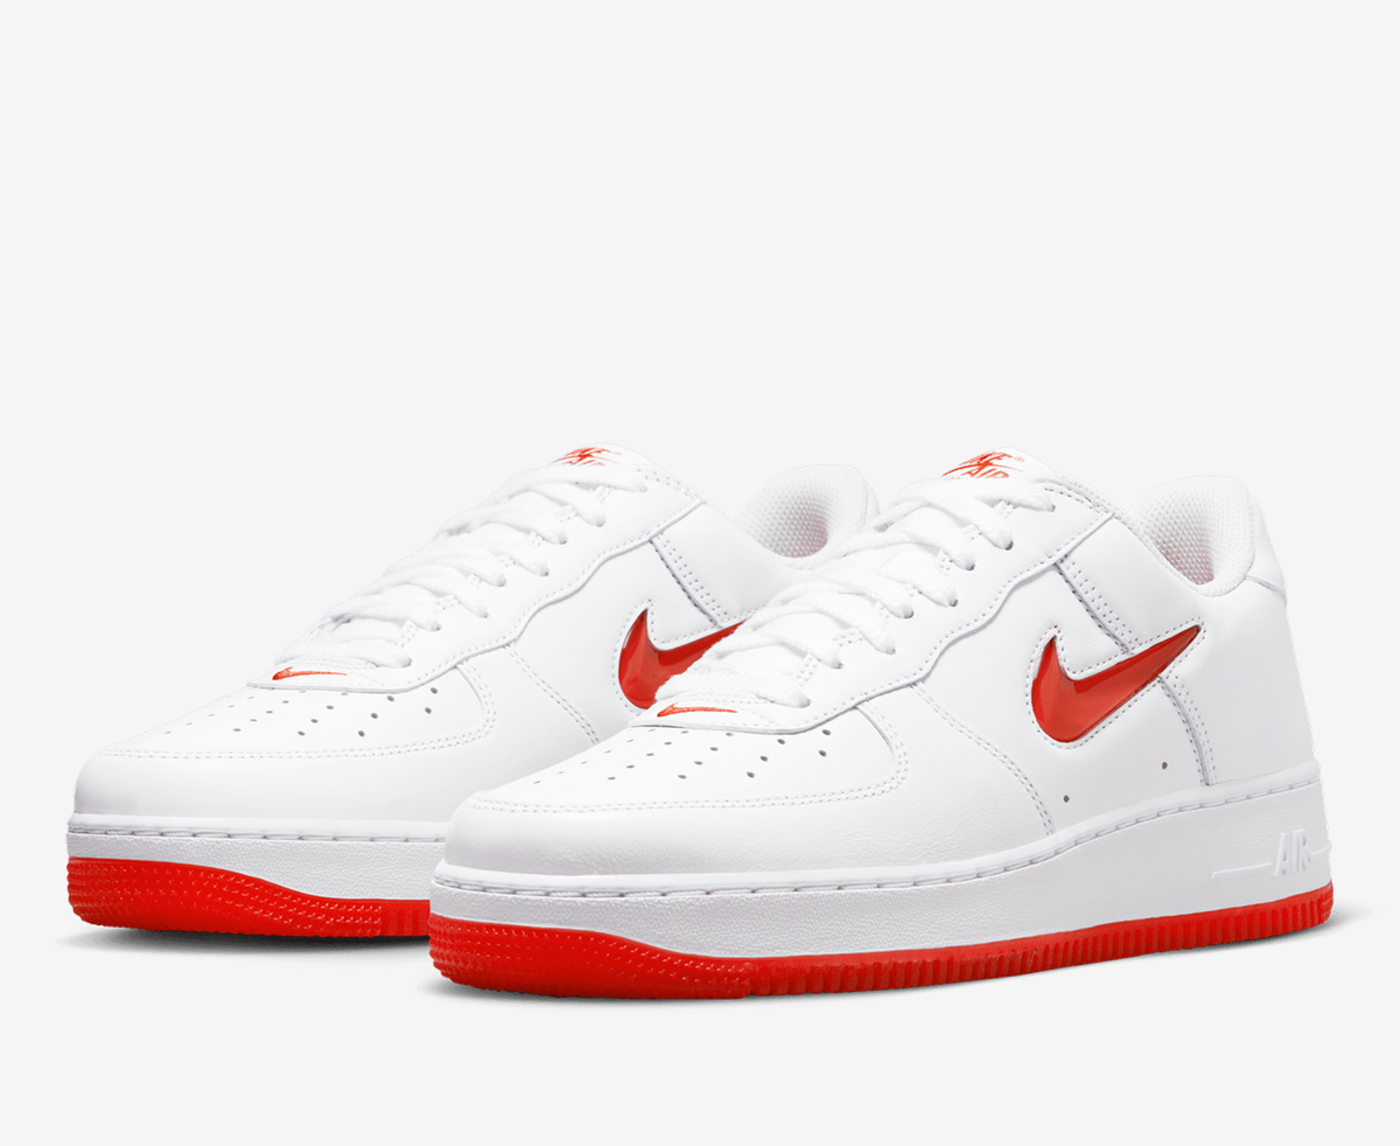 Nike Air Force 1 '07 LV8 Low - Wolf Grey / University Red / White